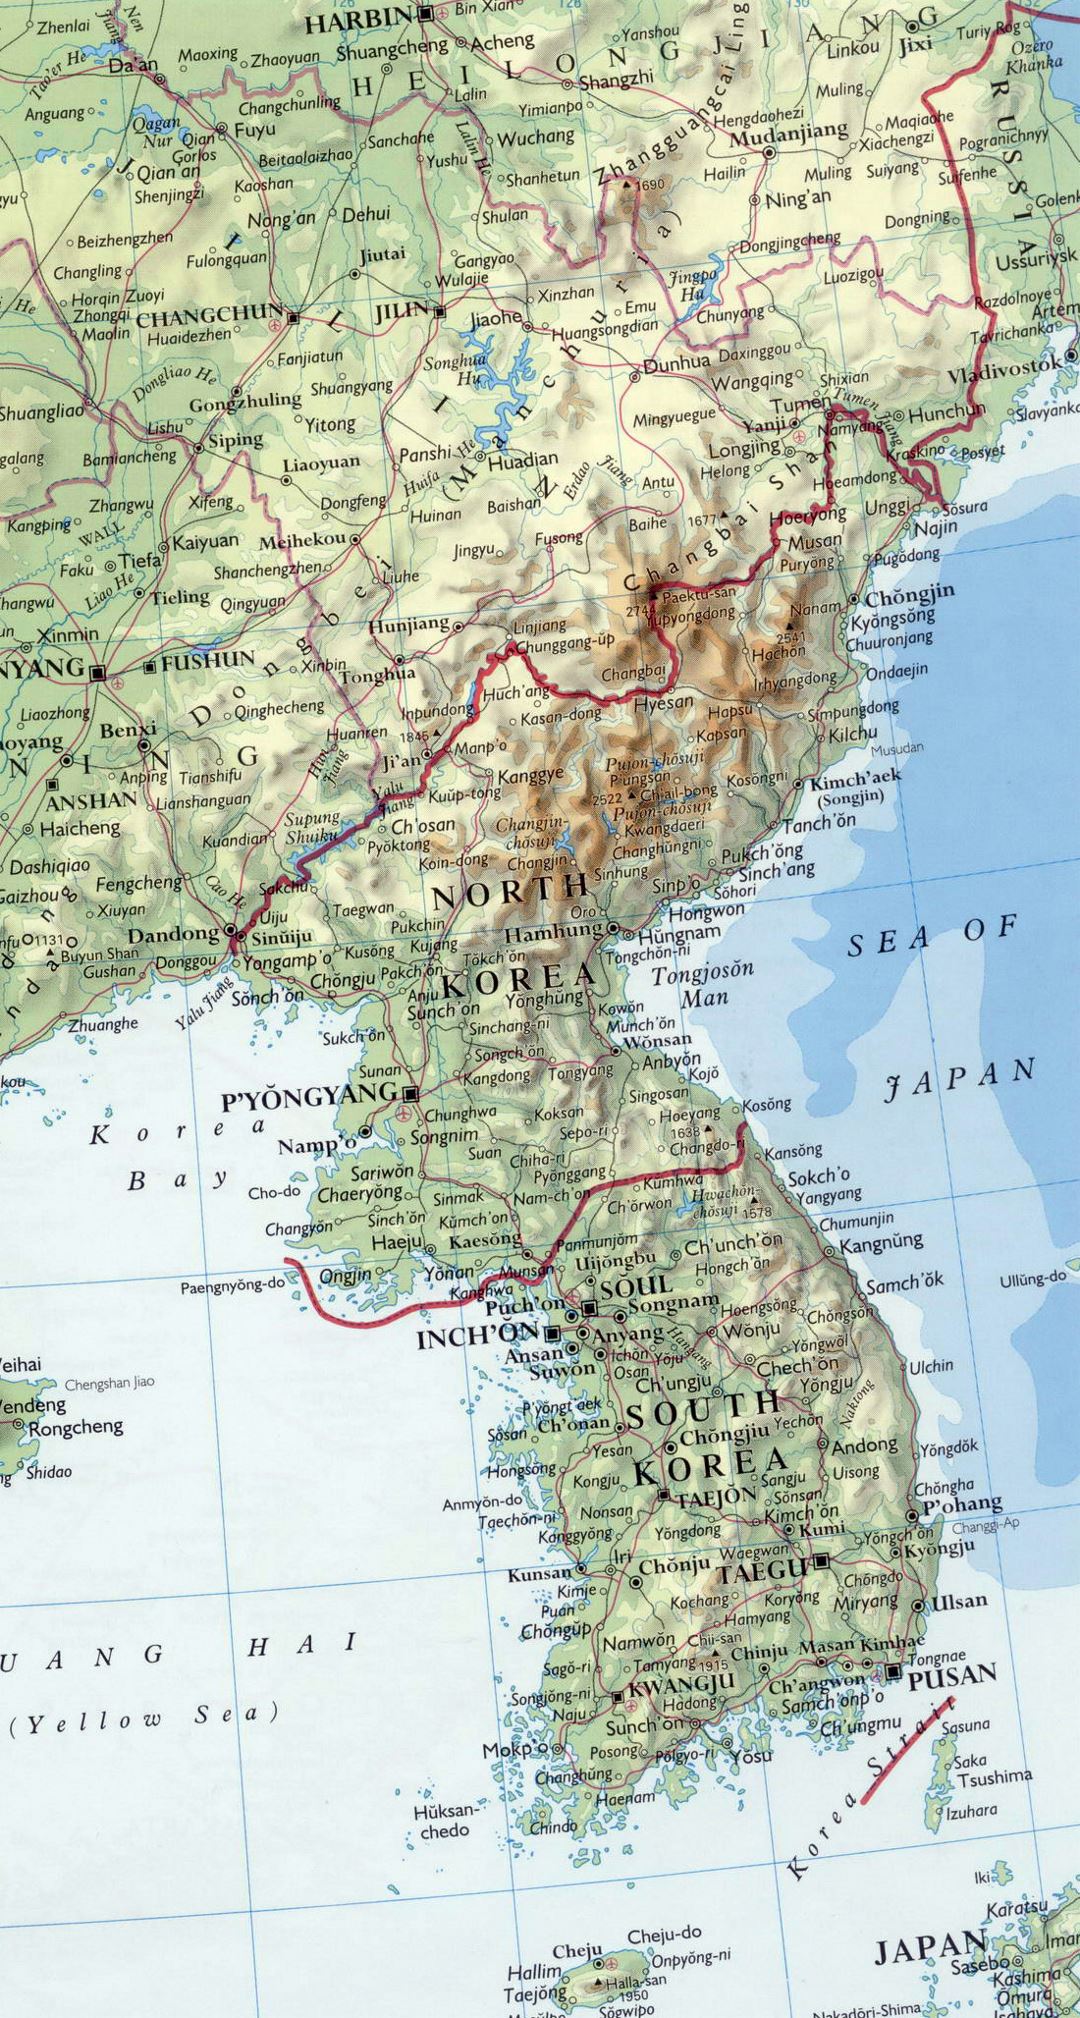 Detailed map of Korean Peninsula with relief, roads, major cities and airports